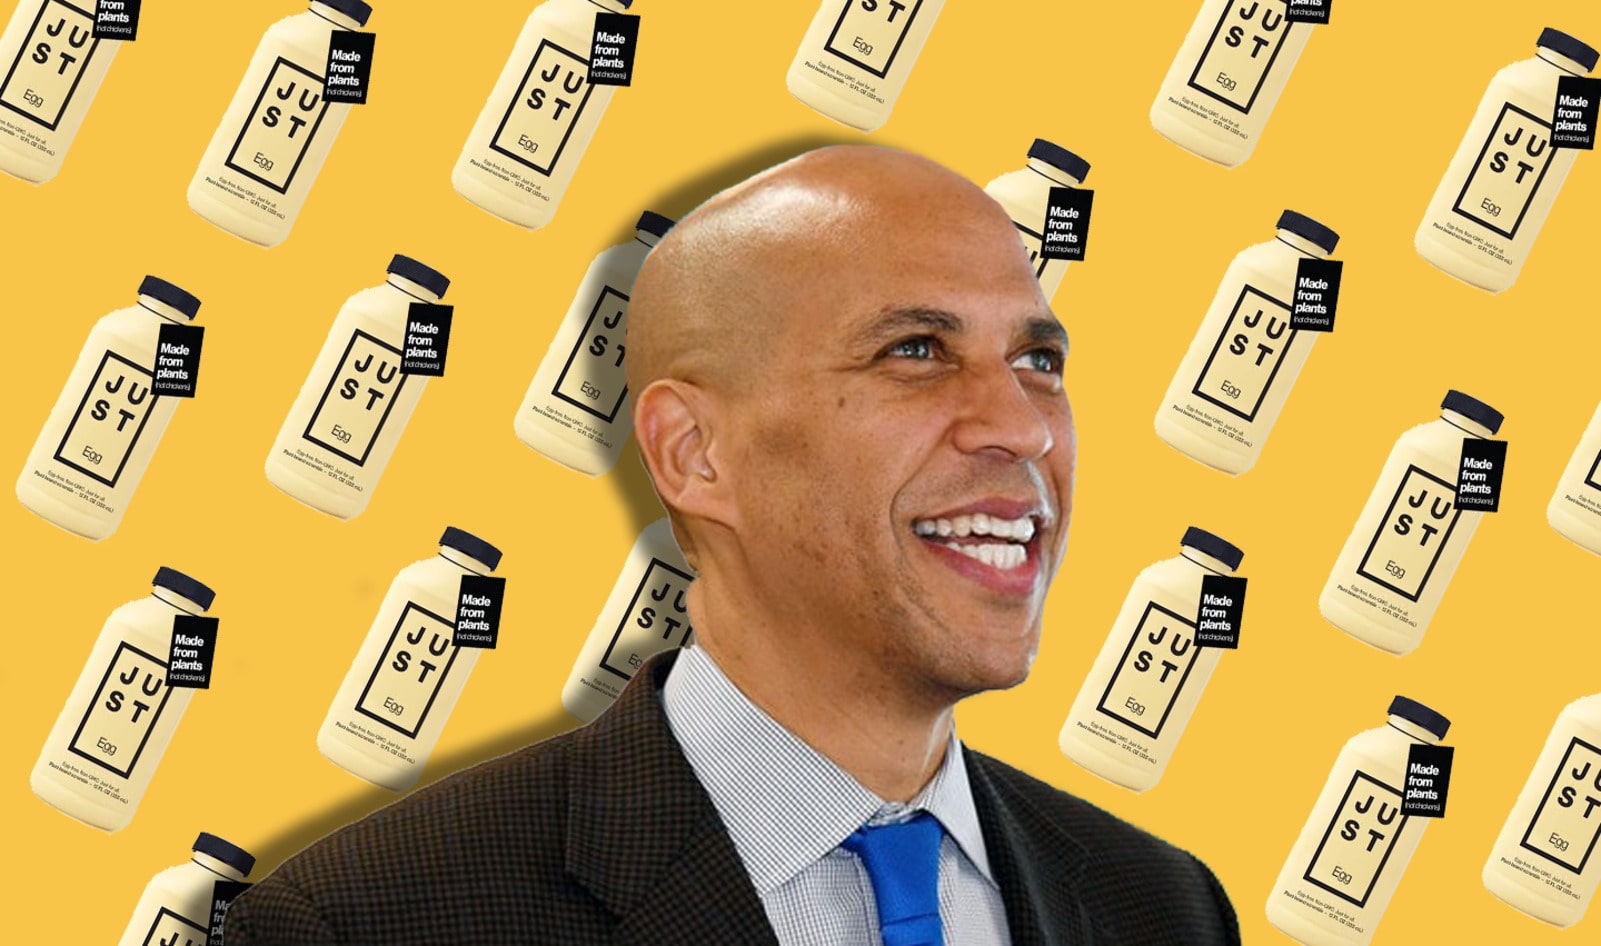 Vegan Presidential Candidate Cory Booker “Finally Got His Hands on” JUST Egg&nbsp;